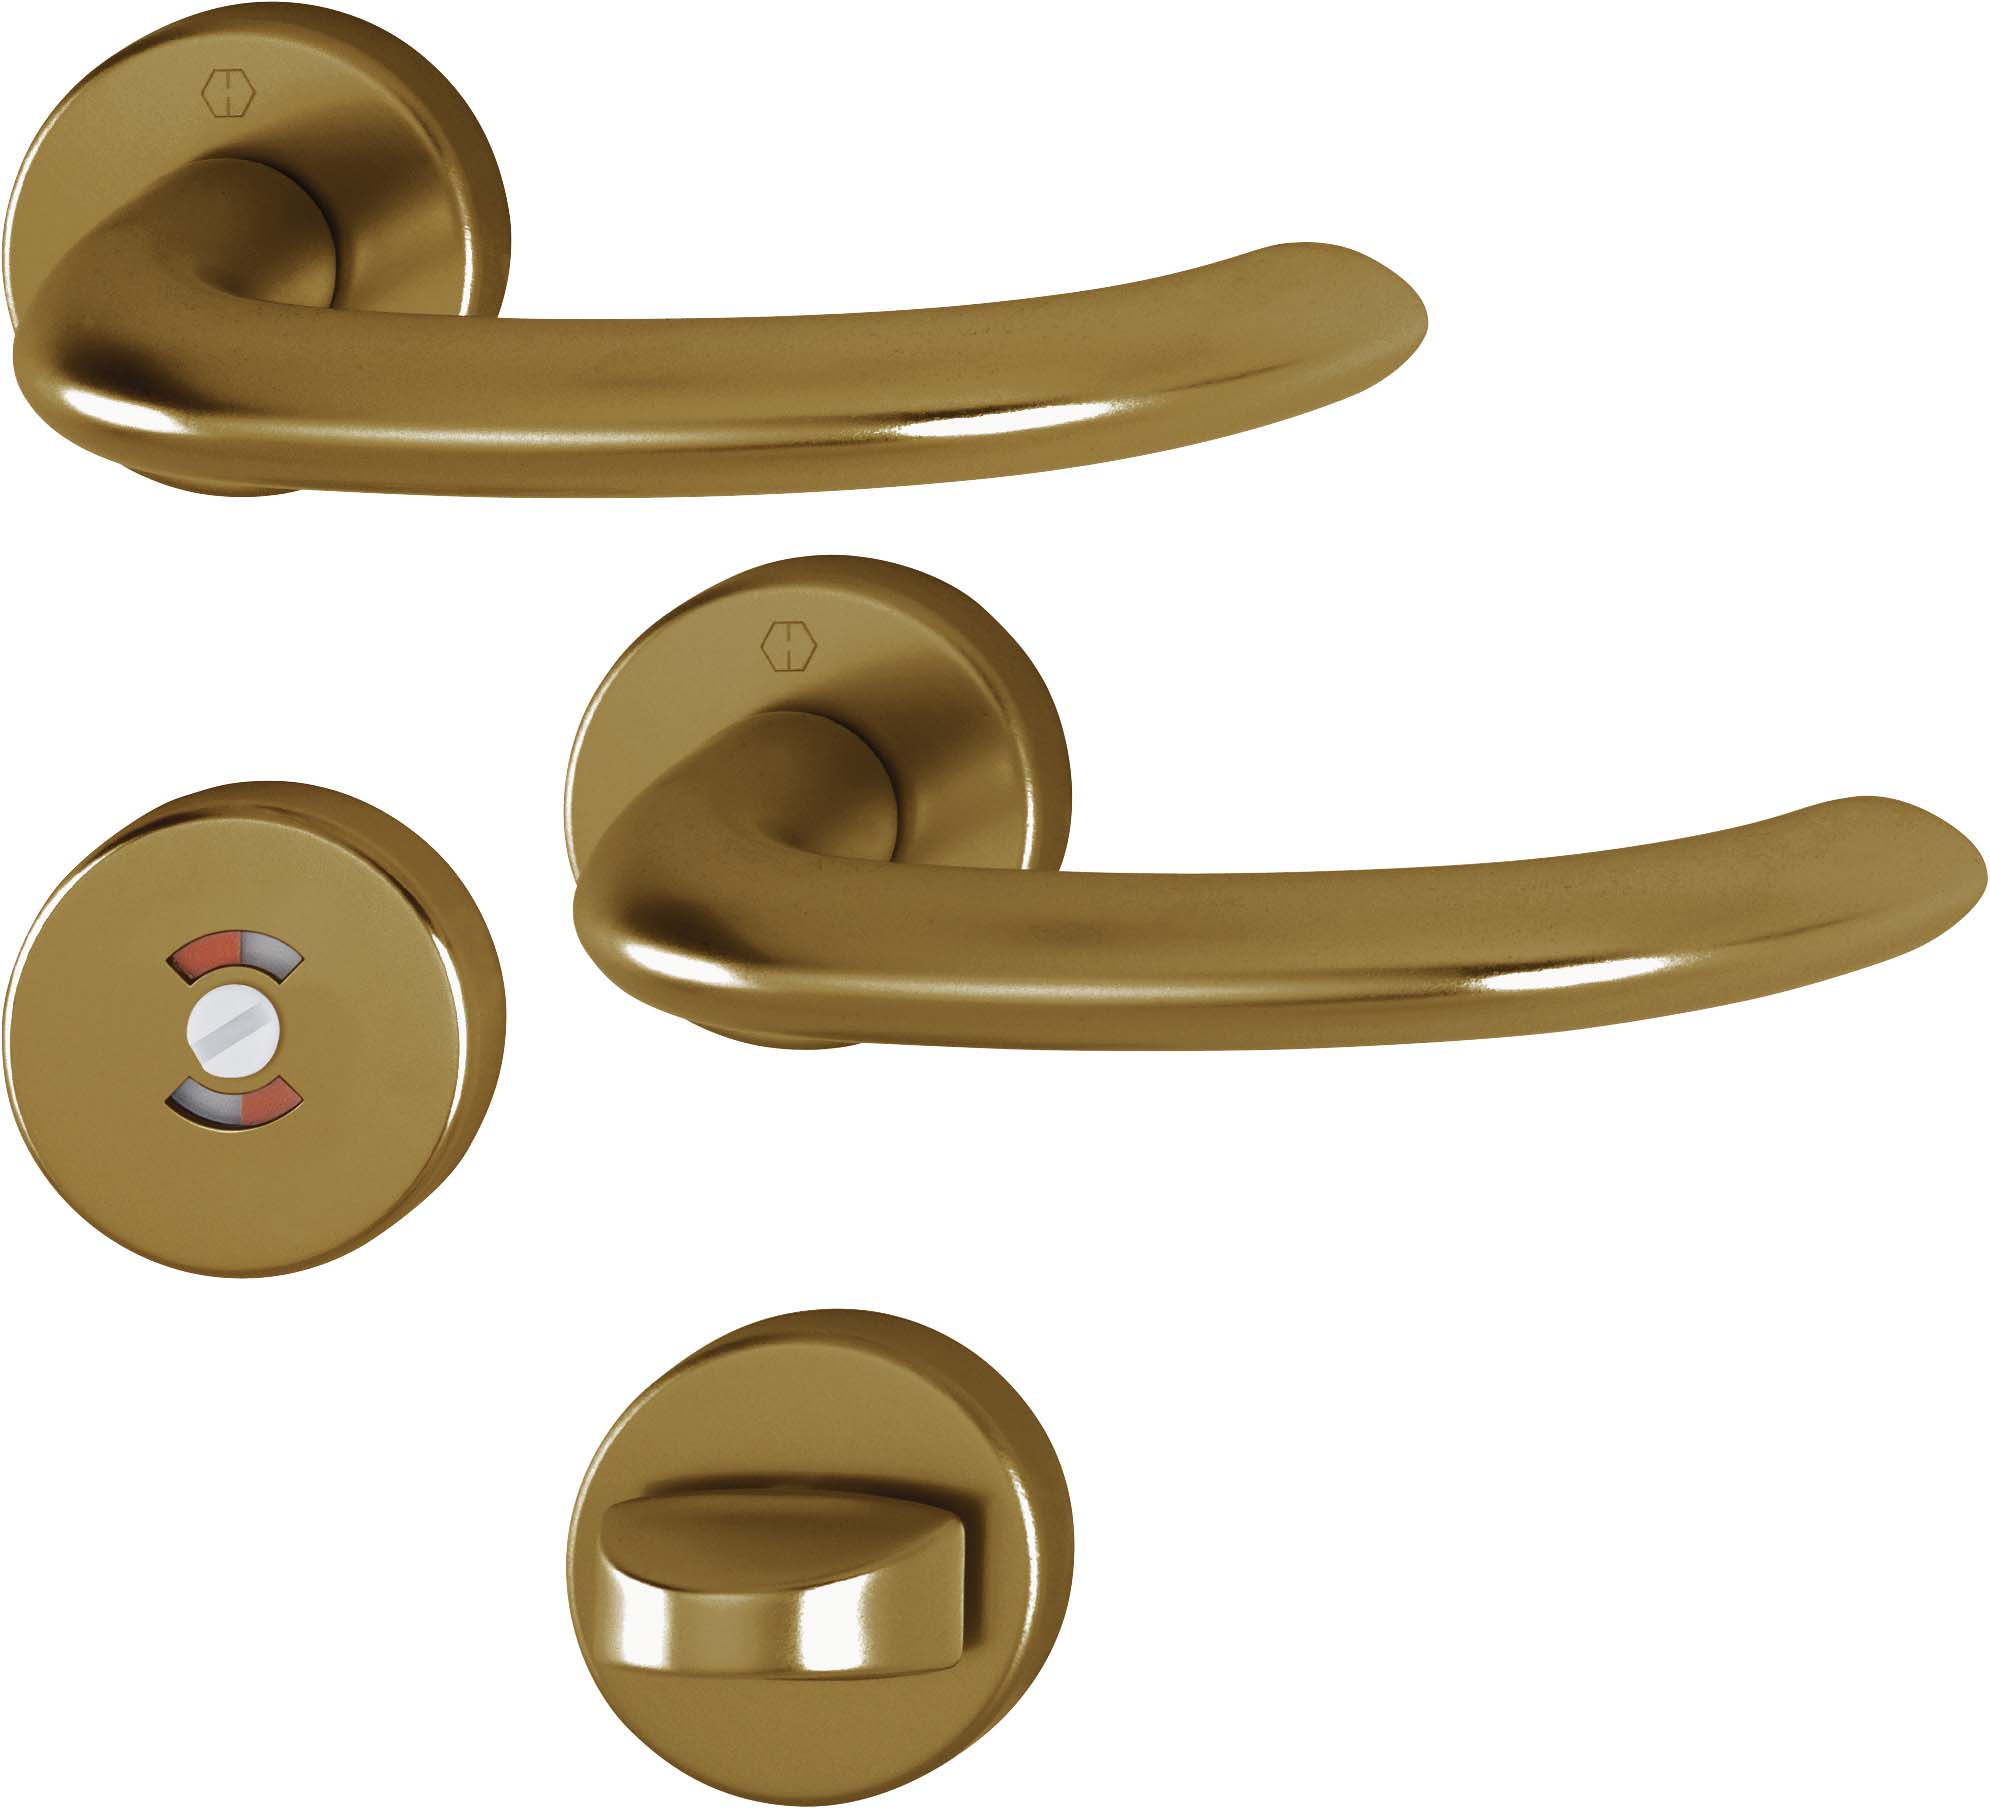 Handle-Marseille-bronze-nuance-with-wc-lock